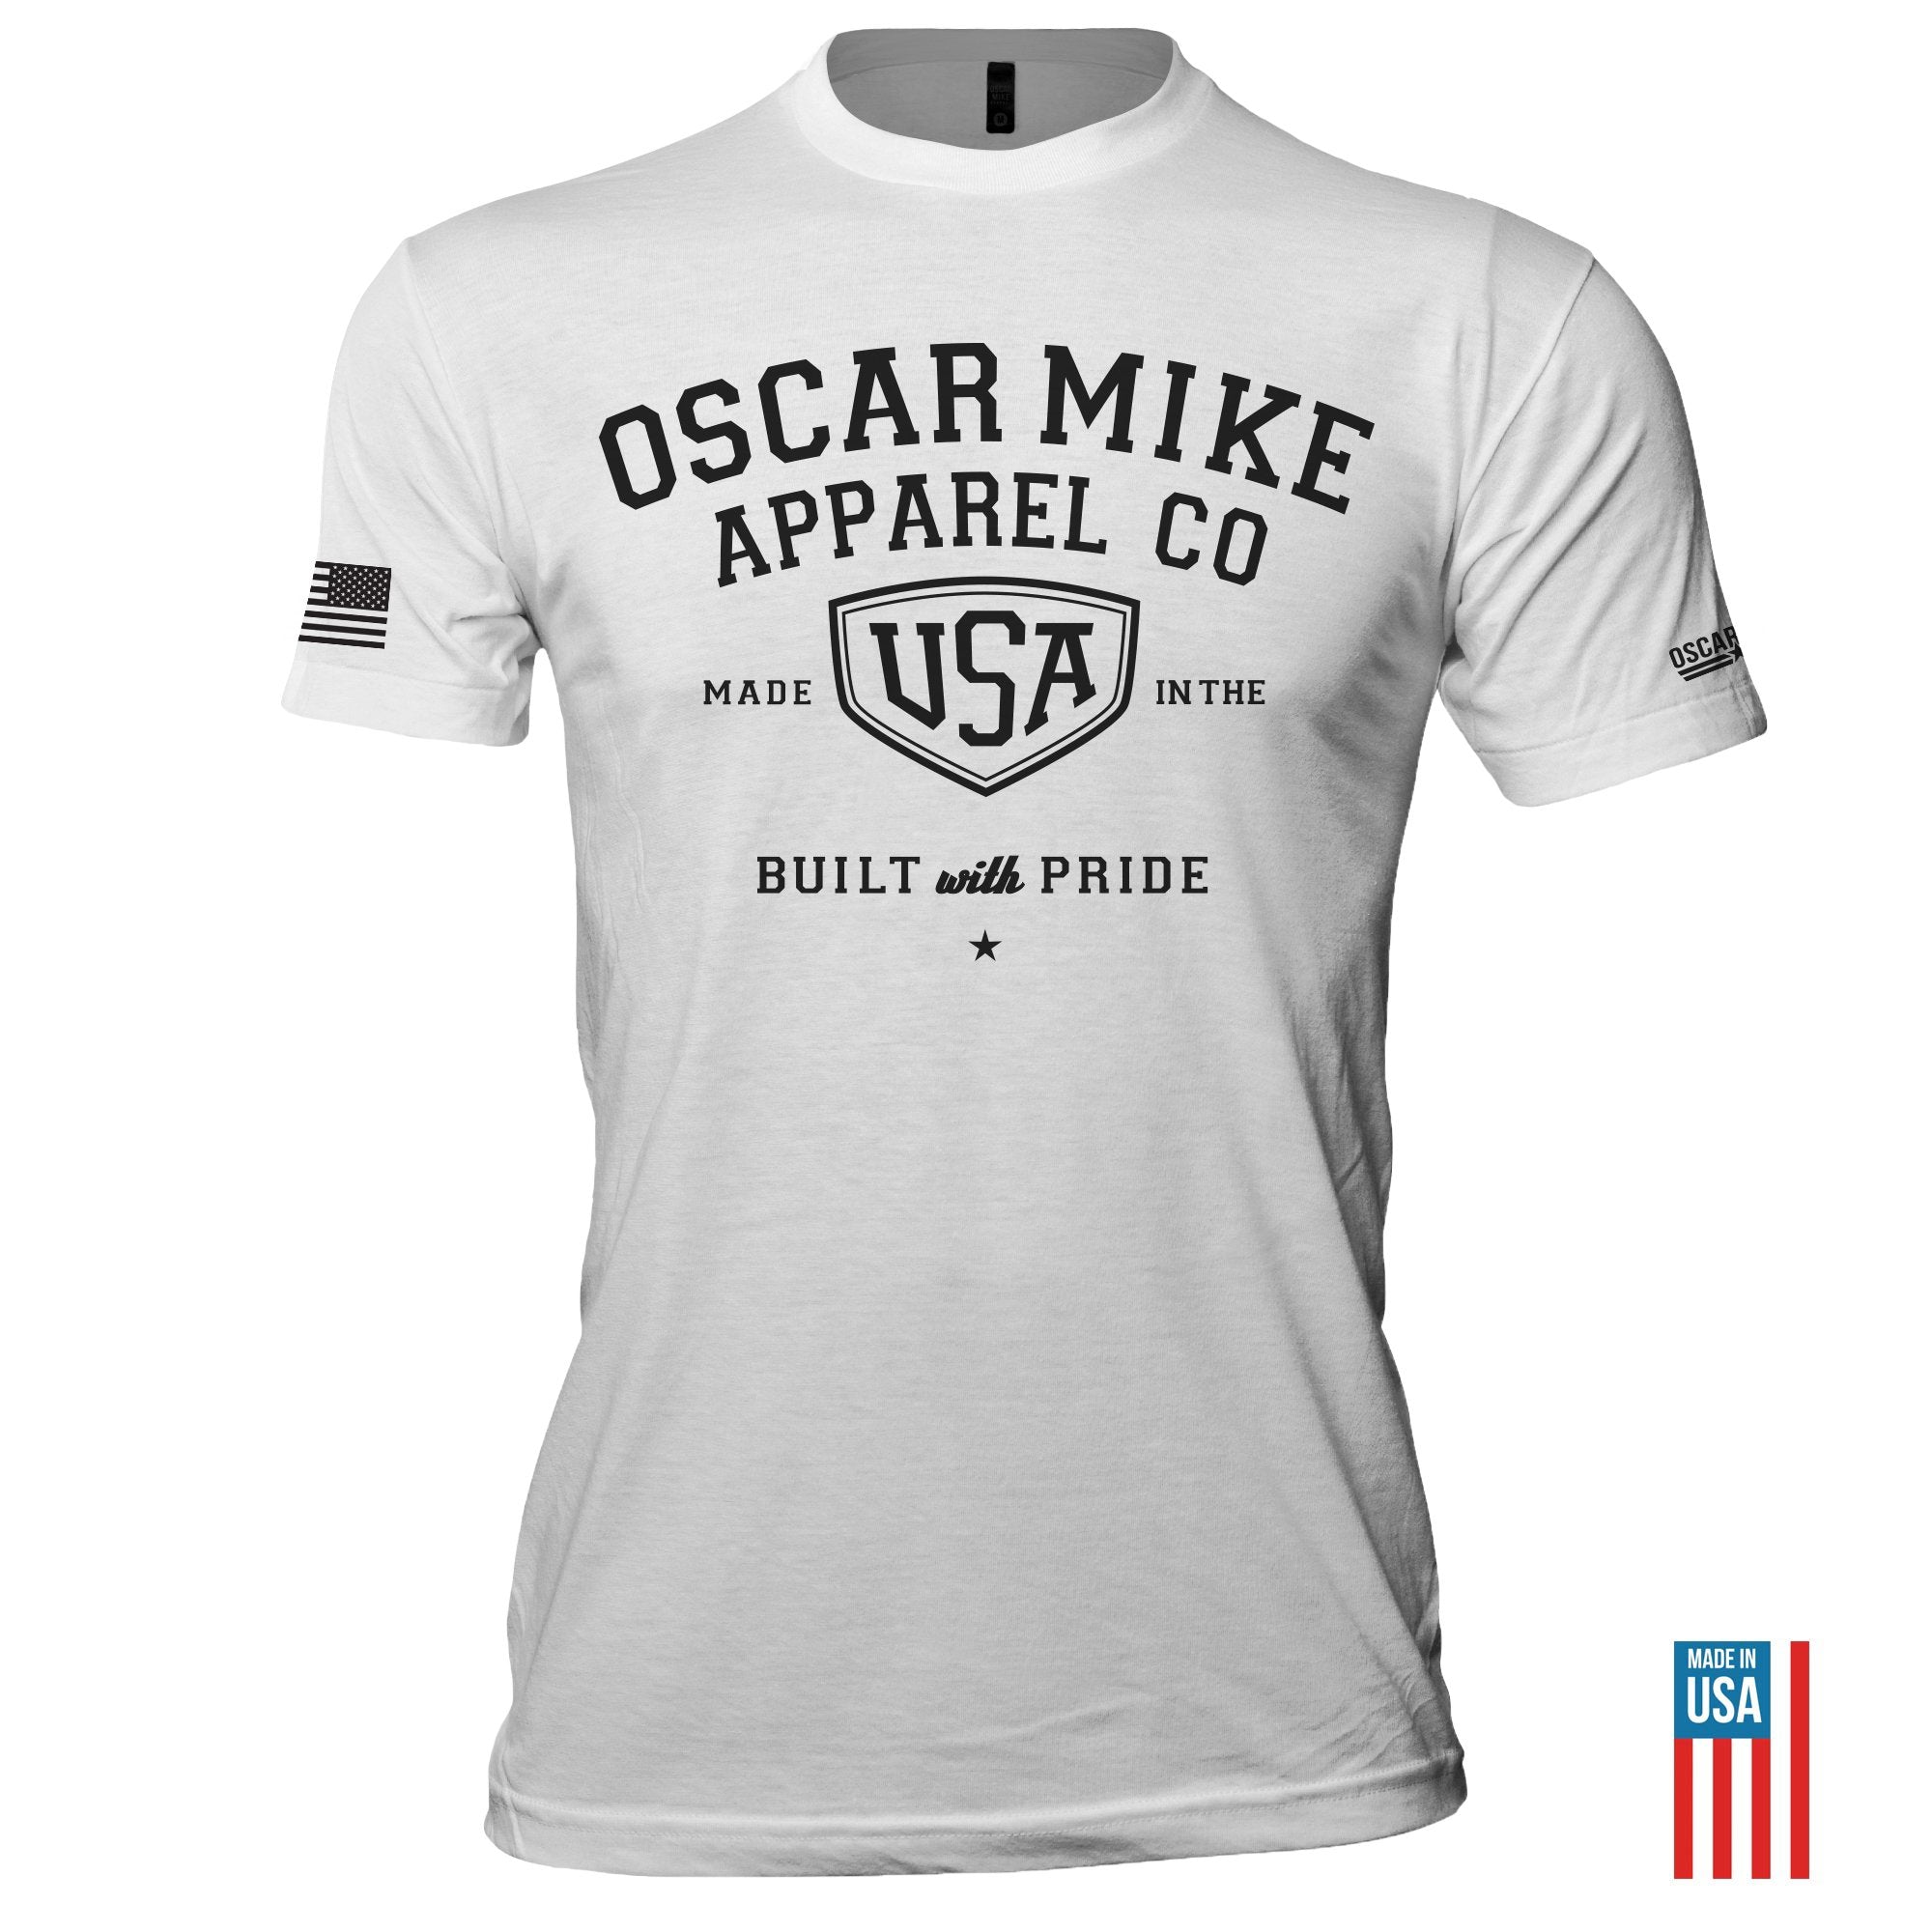 Built With Pride Tee T-Shirt from Oscar Mike Apparel